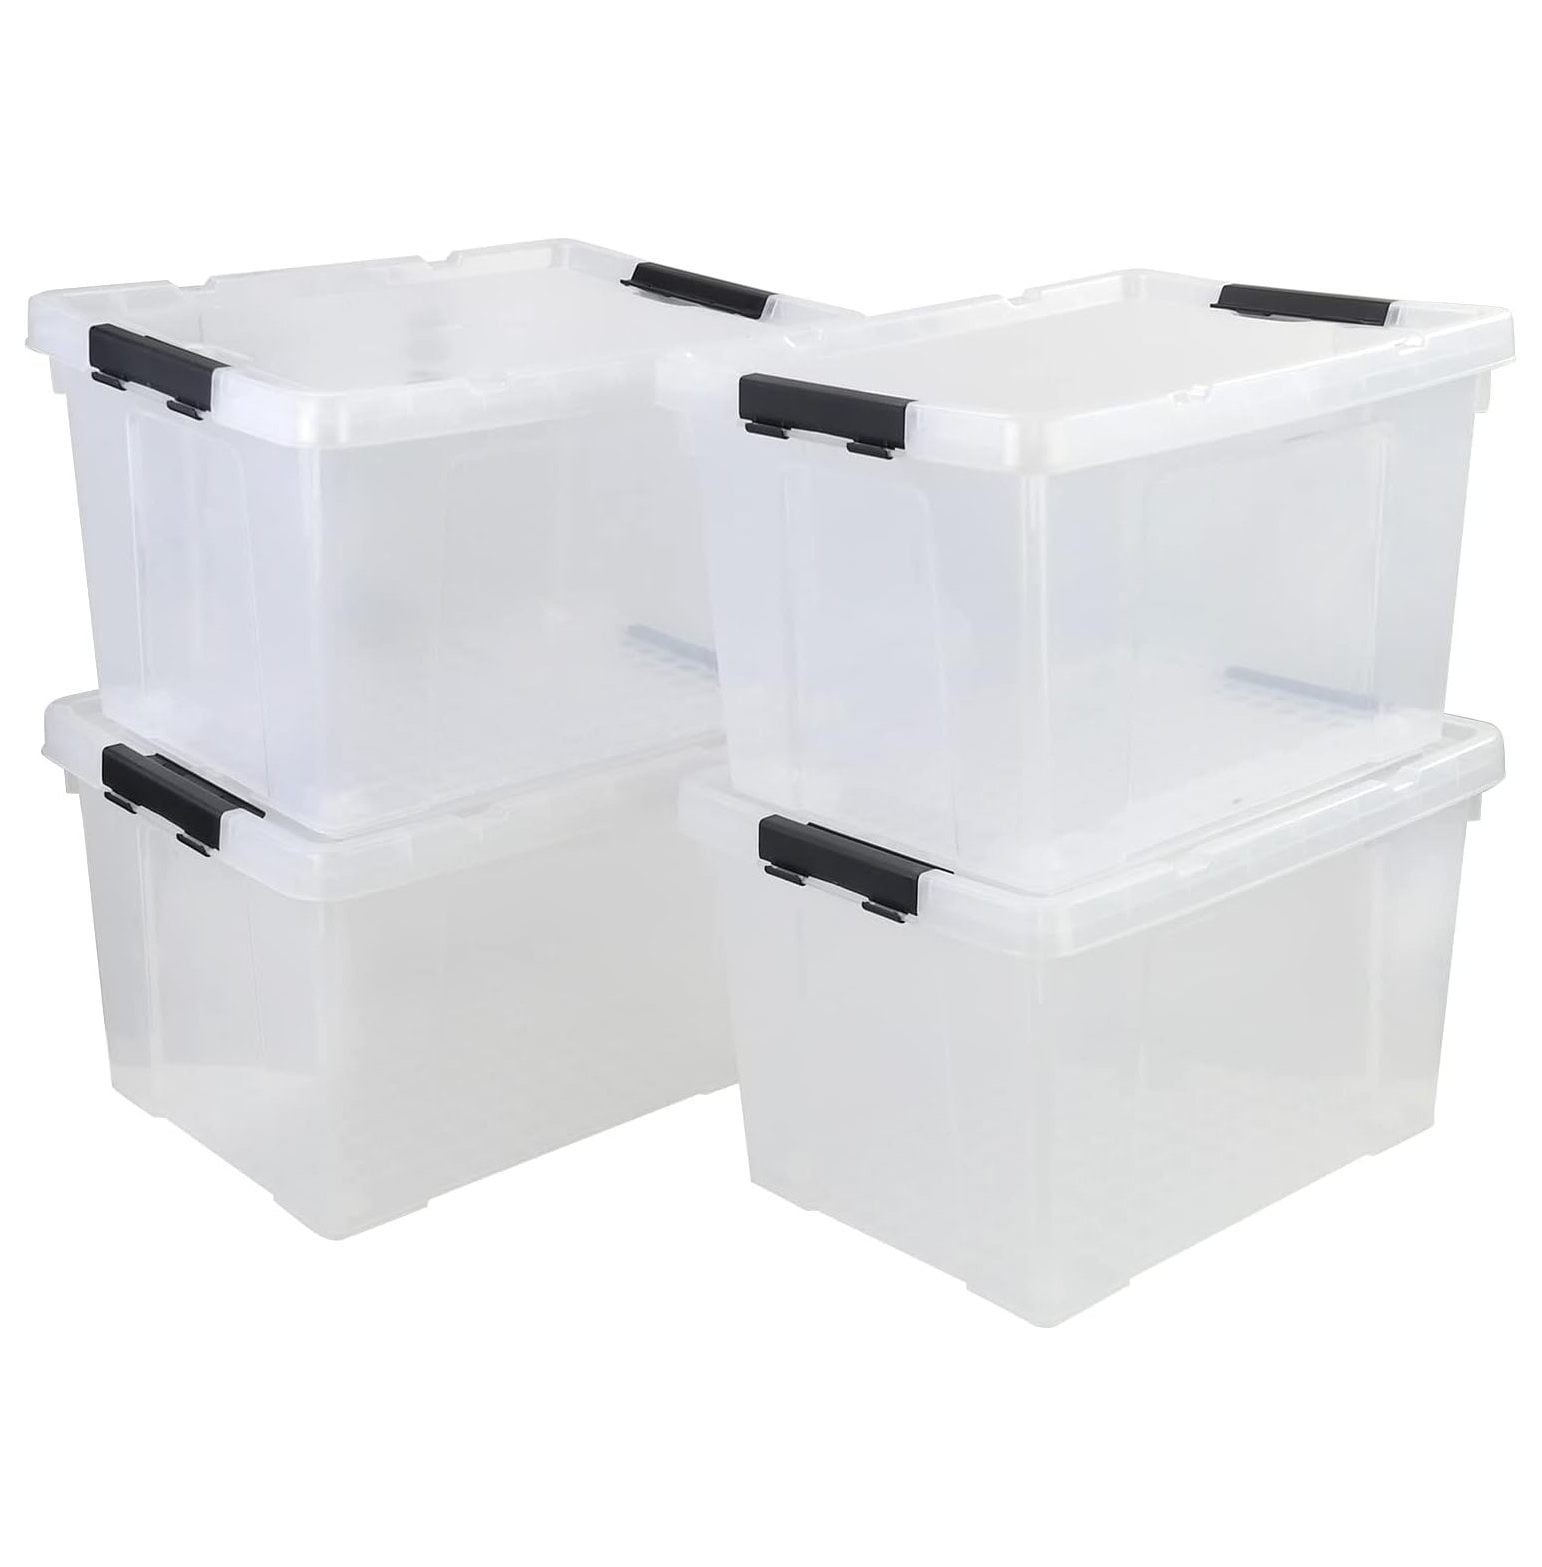 Sandmovie 50 Quart Plastic Large Clear Storage Box with Lid and